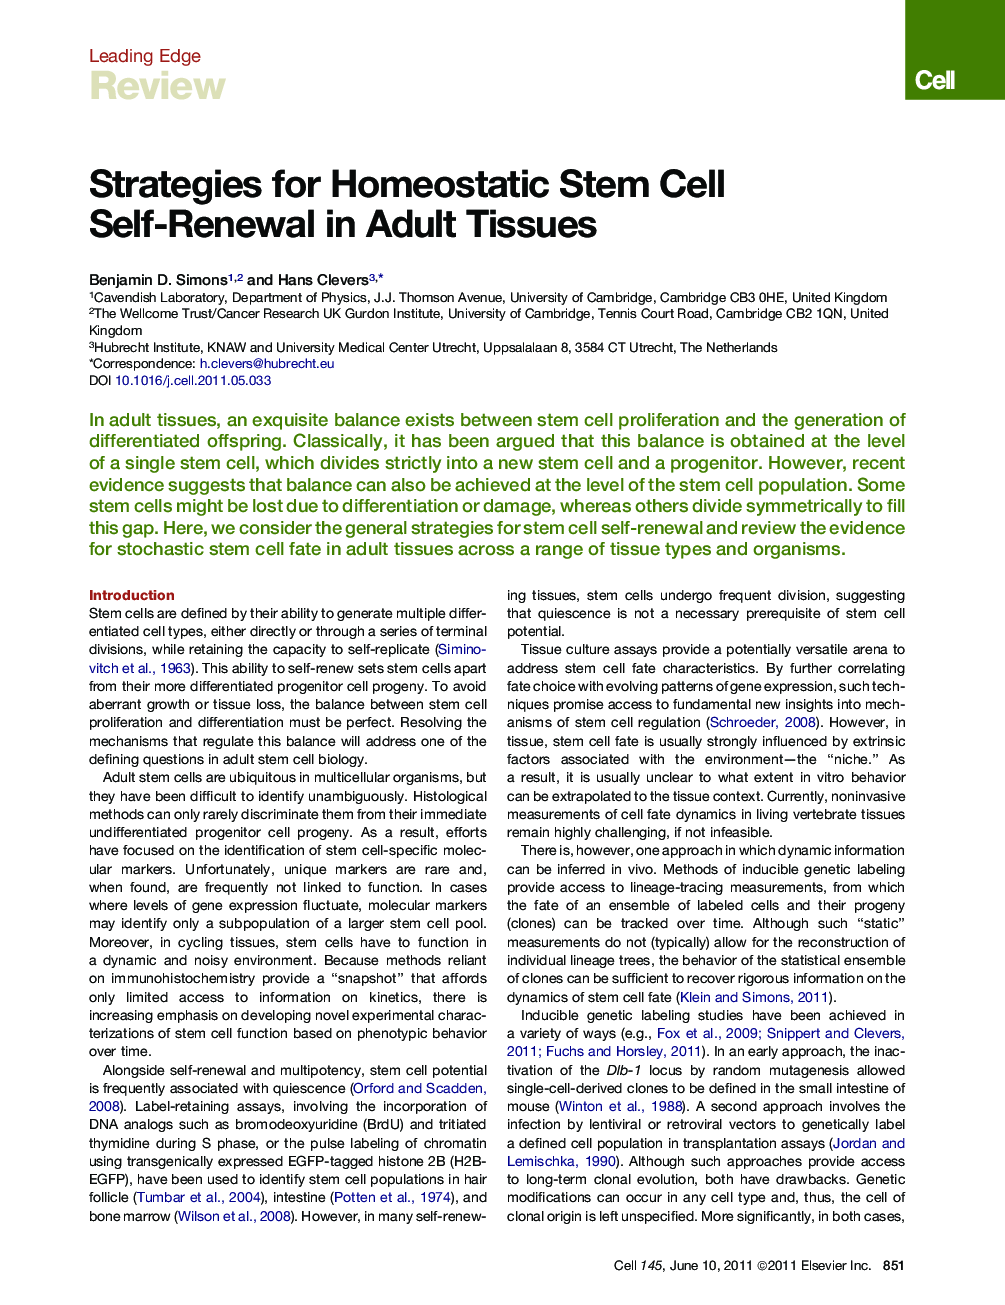 Strategies for Homeostatic Stem Cell Self-Renewal in Adult Tissues